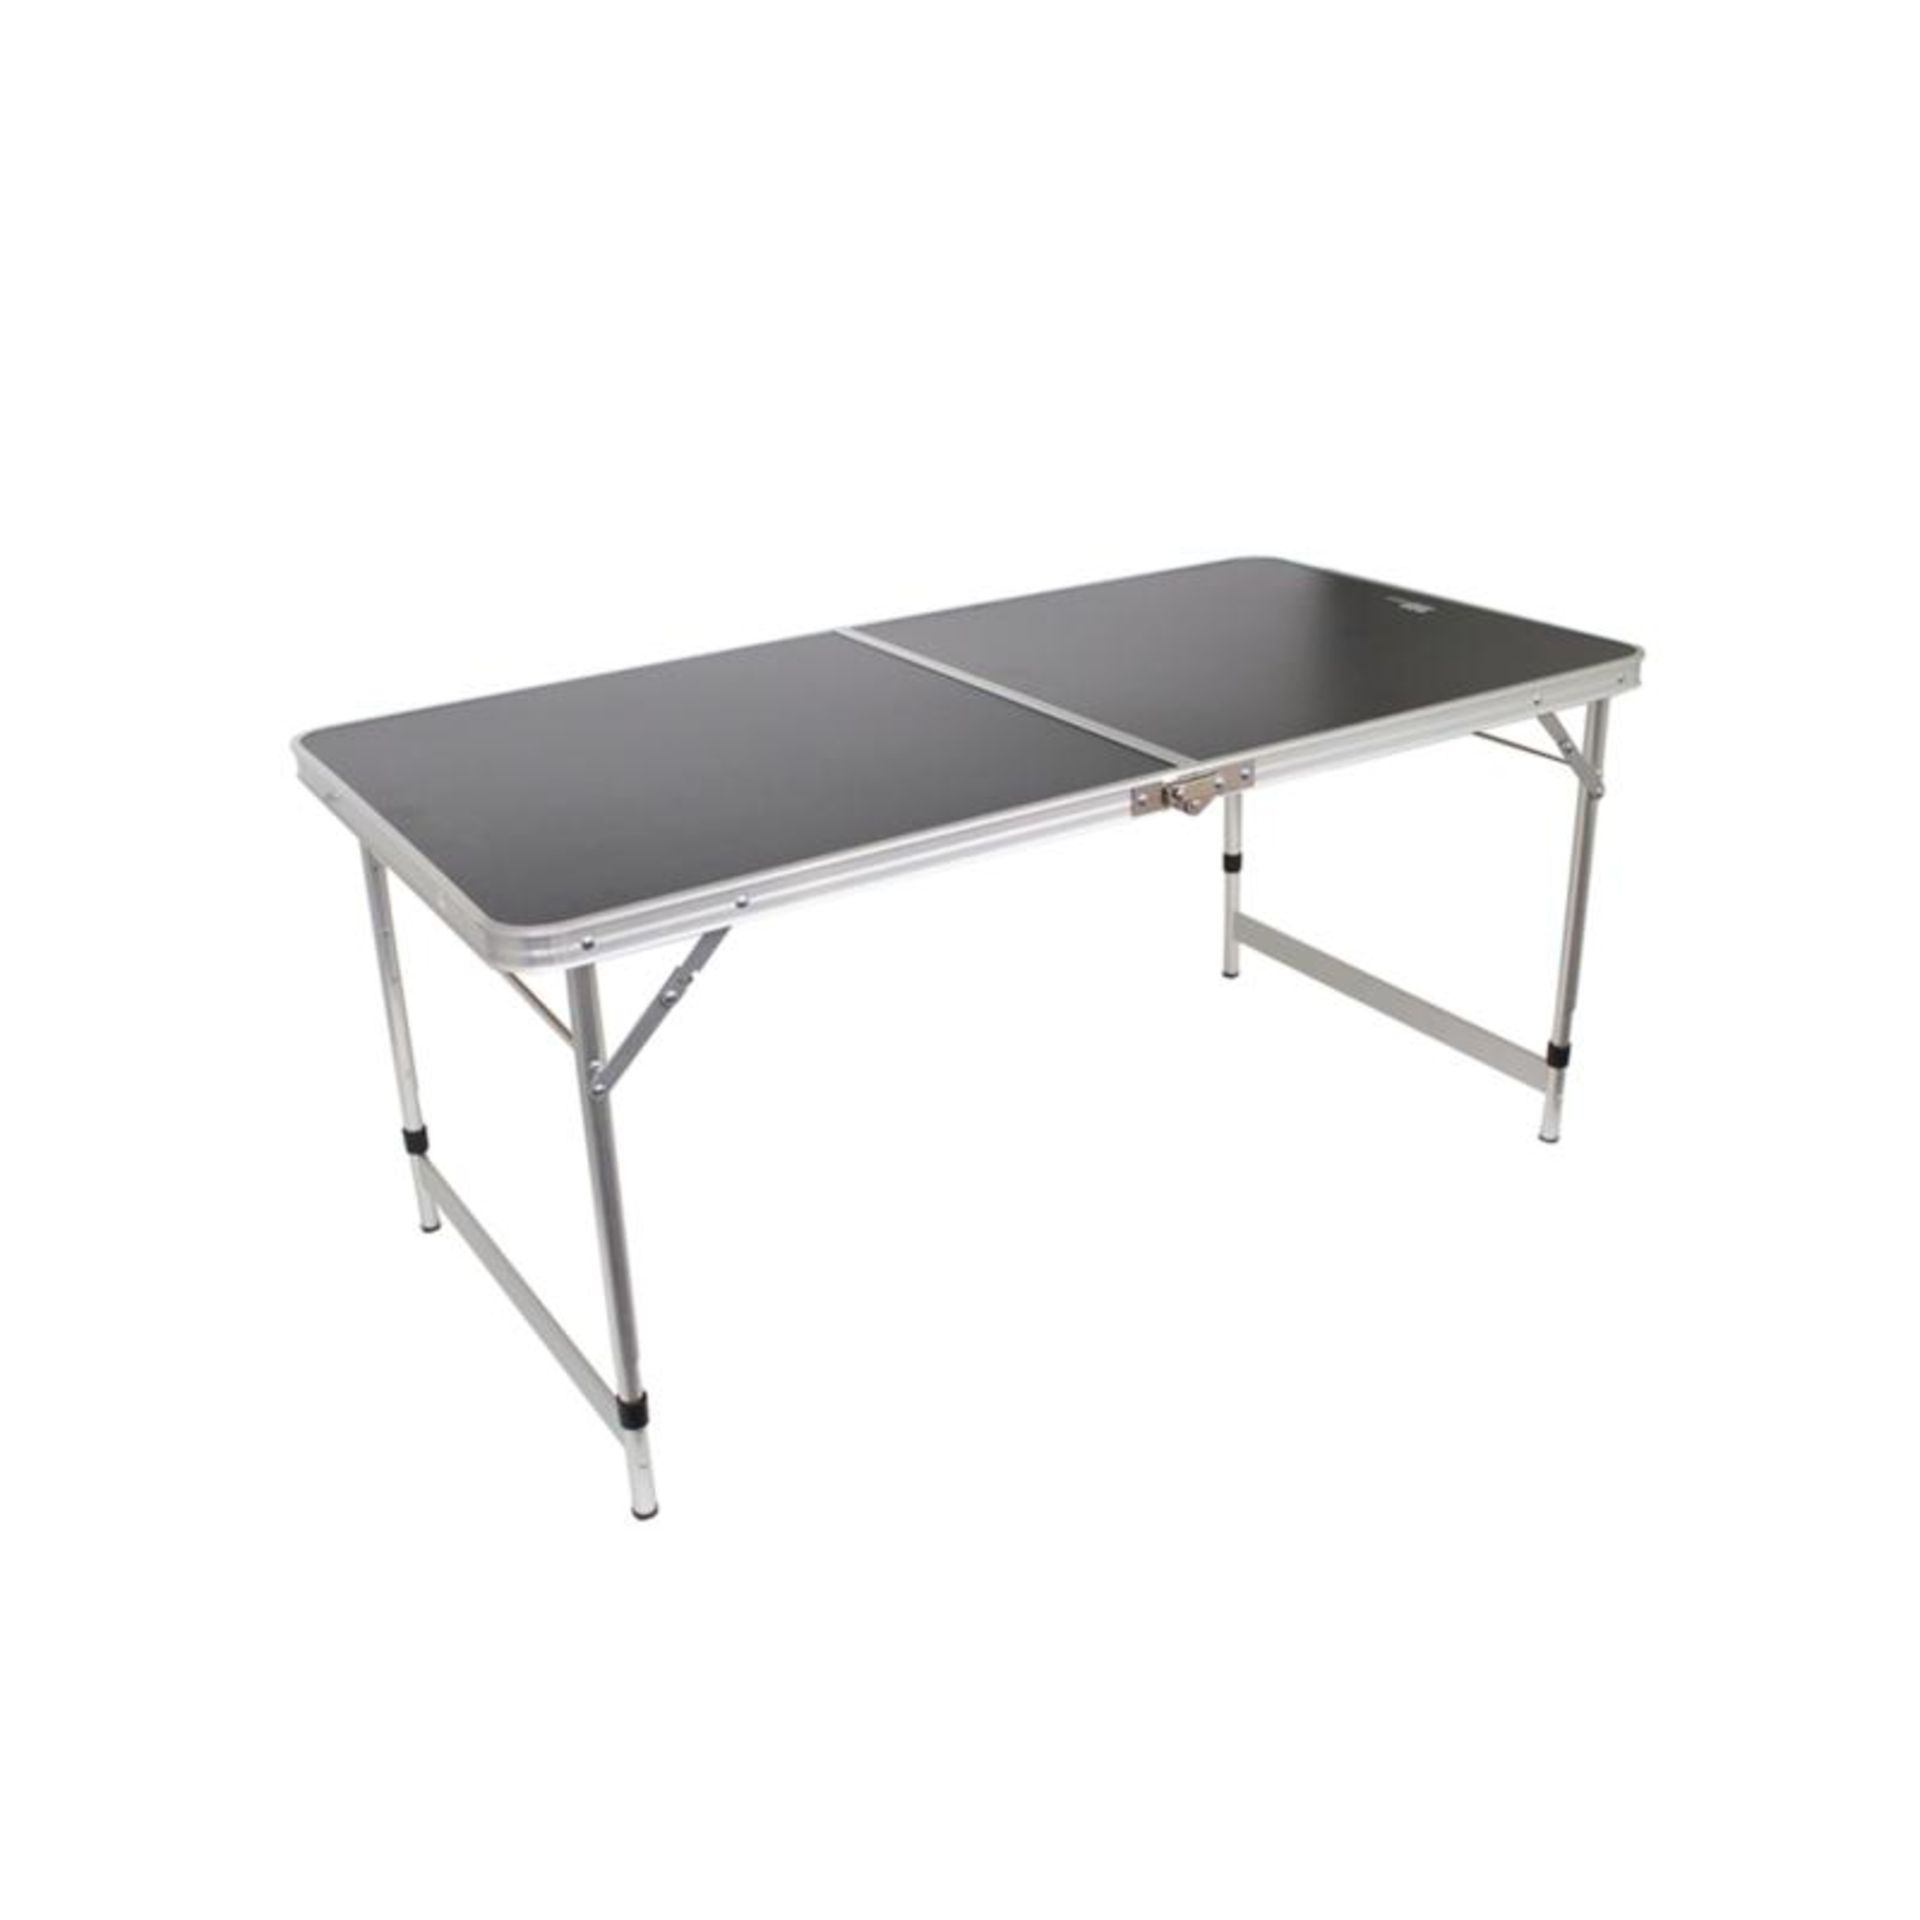 V *TRADE QTY* Brand New 1.2m Double Folding Table With Carry Bag - Charcoal Top/Silver Frame -